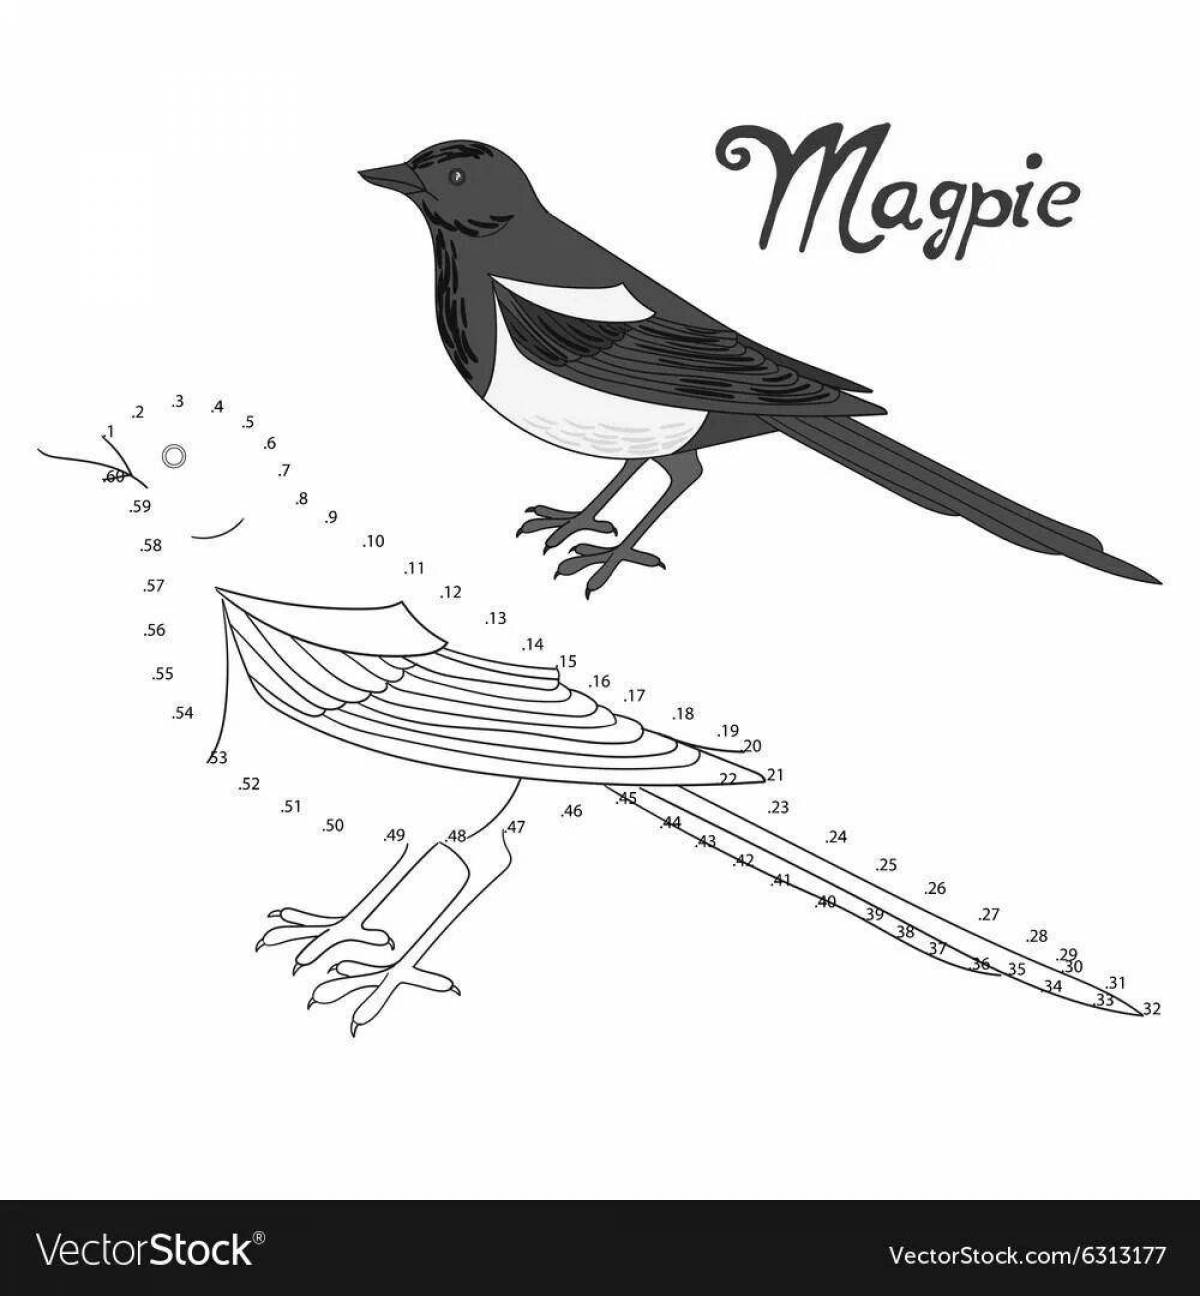 Magpie for children 3 4 years old #7